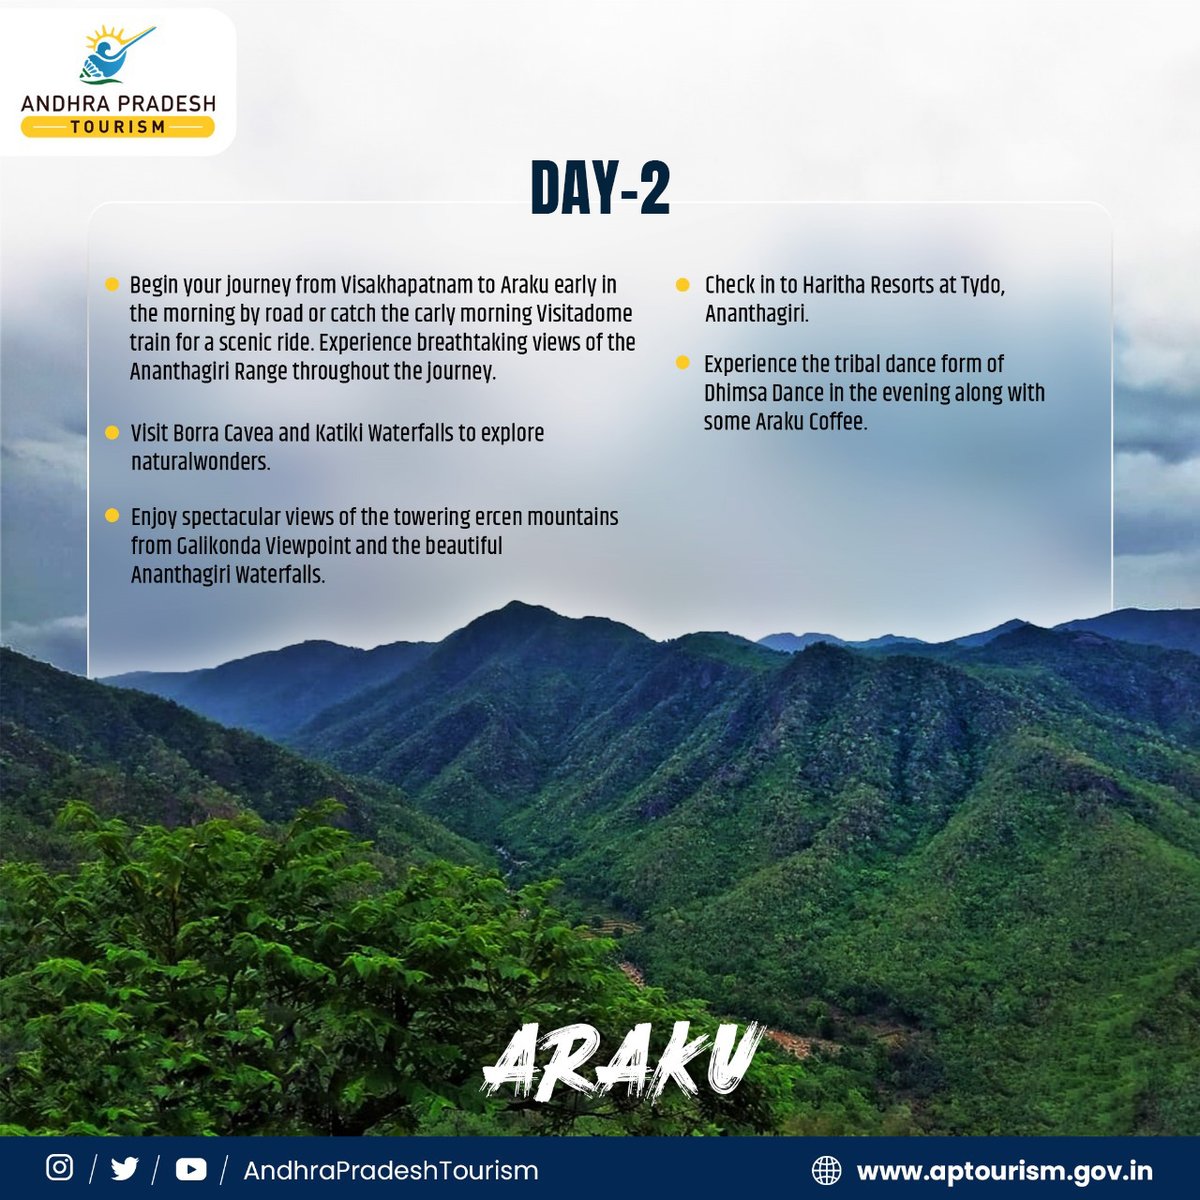 Explore the Natural Wonders of Visakhapatnam, Araku, Lambasingi, and Maredumalli!
try this breathtaking journey through the picturesque landscapes where nature's beauty awaits at every turn. Experience the wonders of nature like never before on this unforgettable 5-day journey!